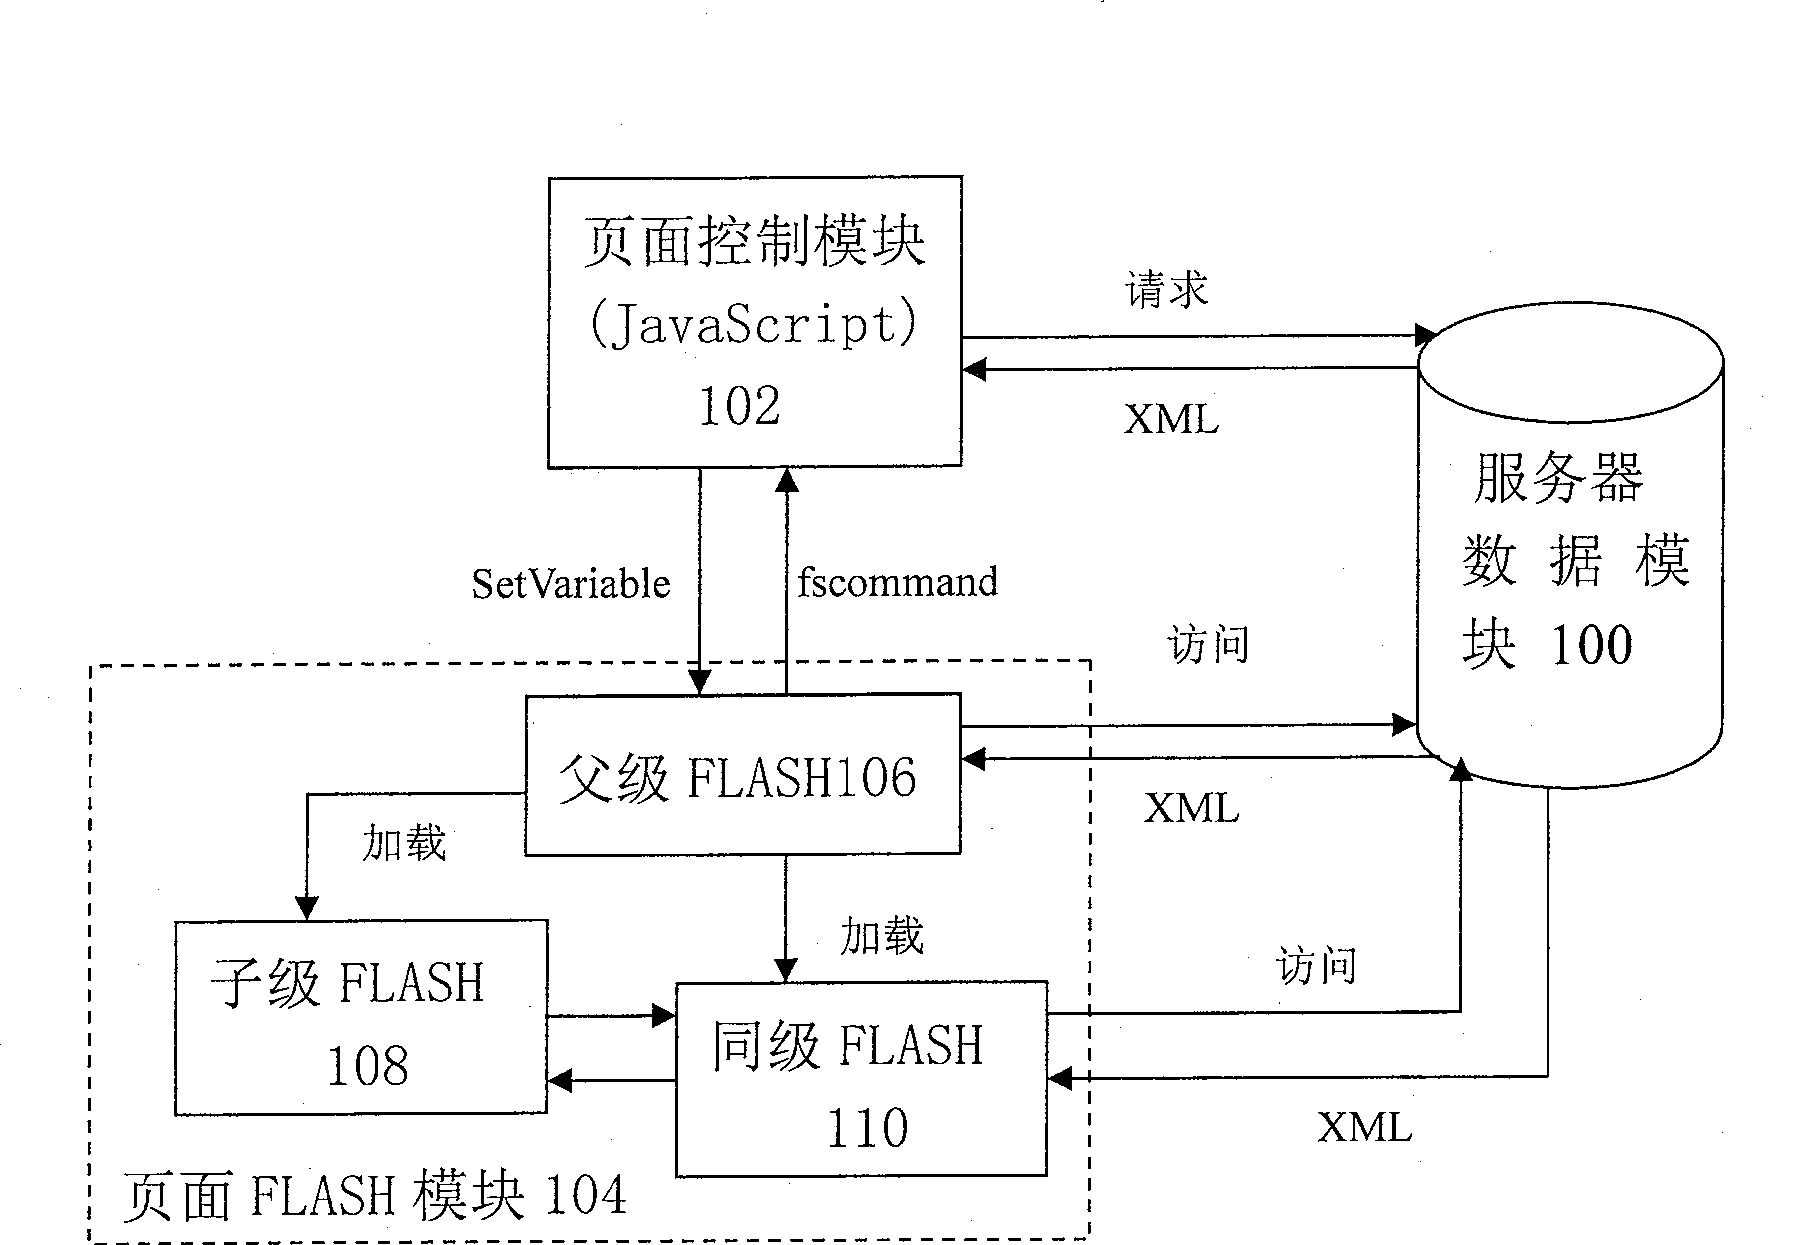 Method and system for webpage generation